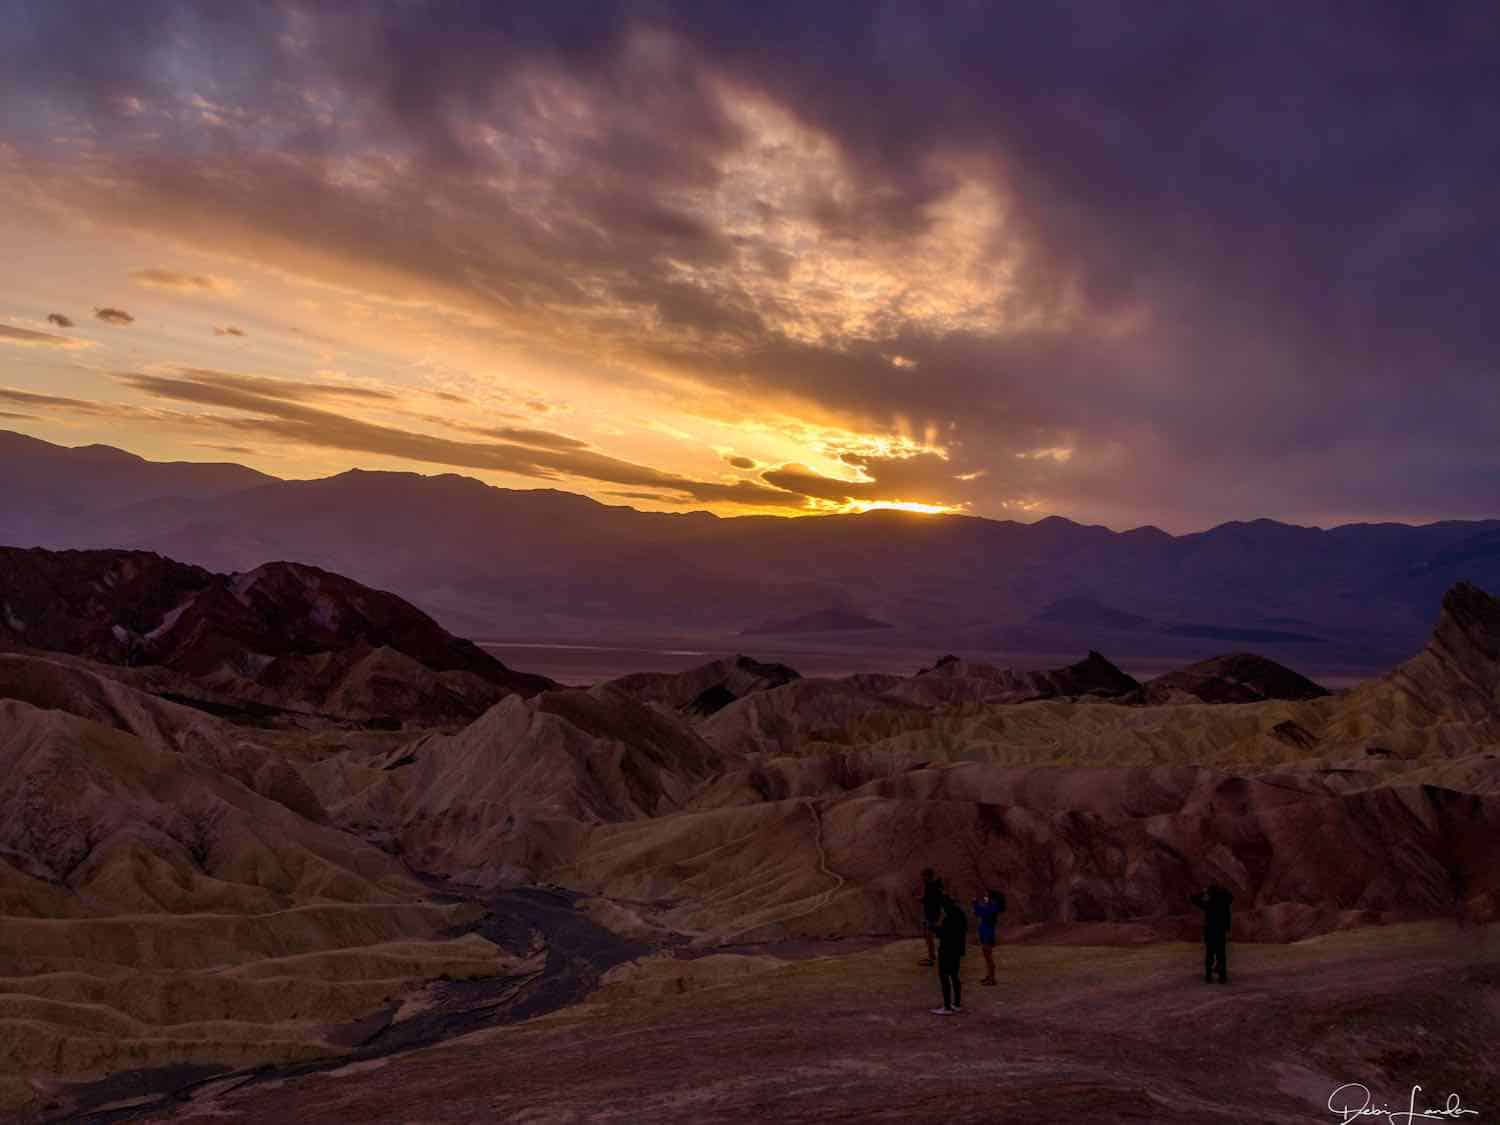 The gold and purple afterglow of a sunset at Zabriskie Point on a Death Valley weekend trip.